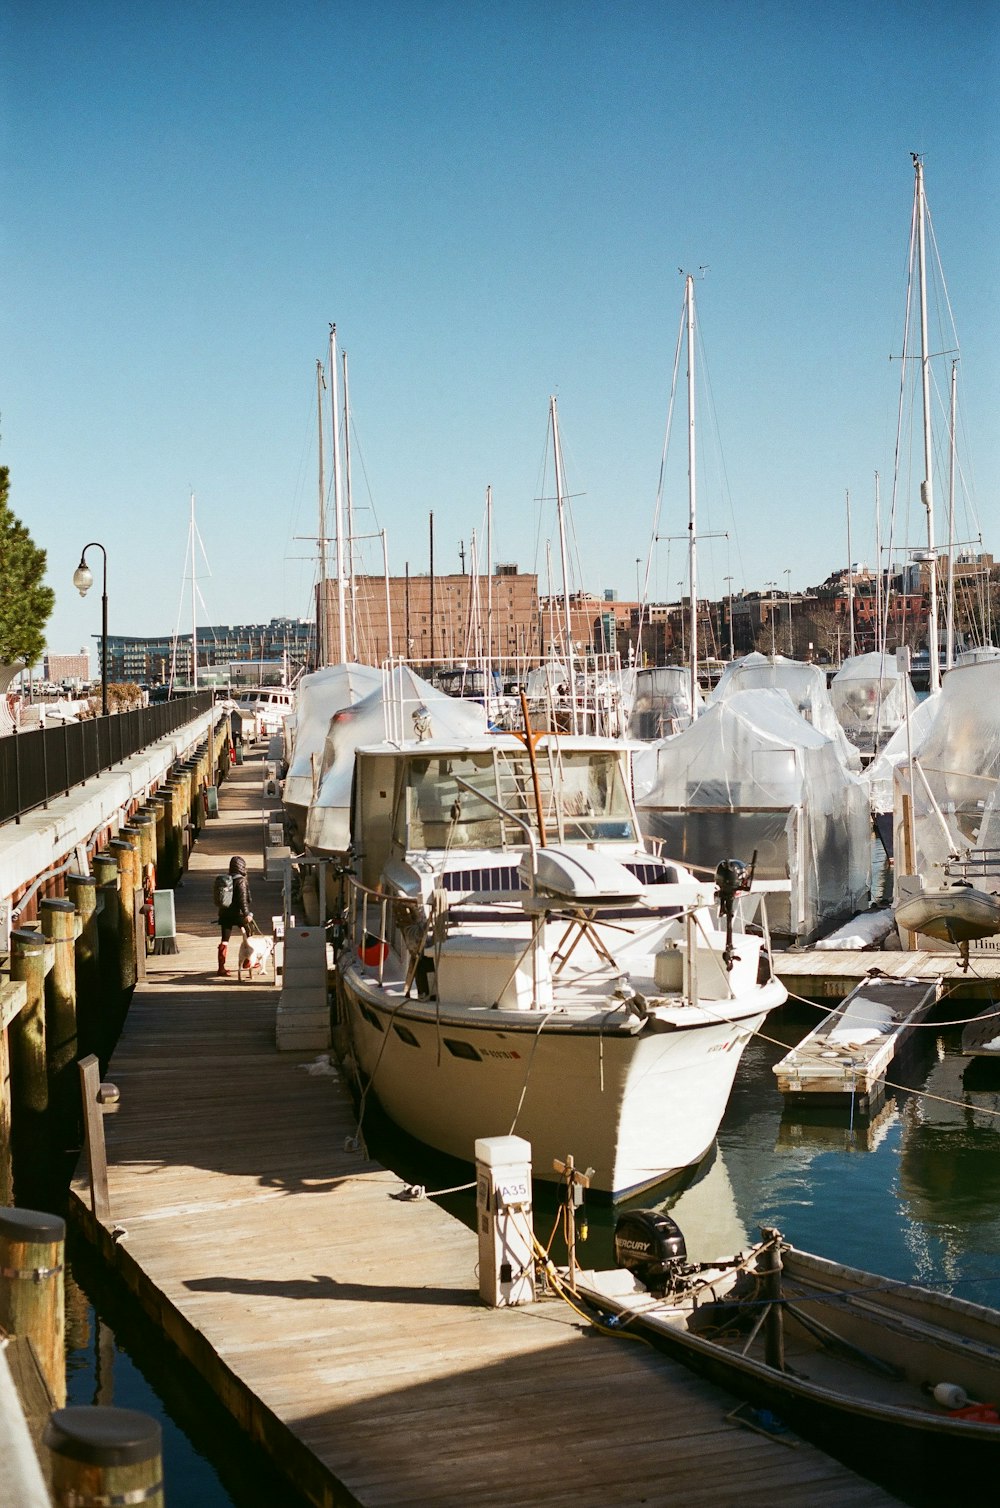 several boats are docked at a dock in a marina